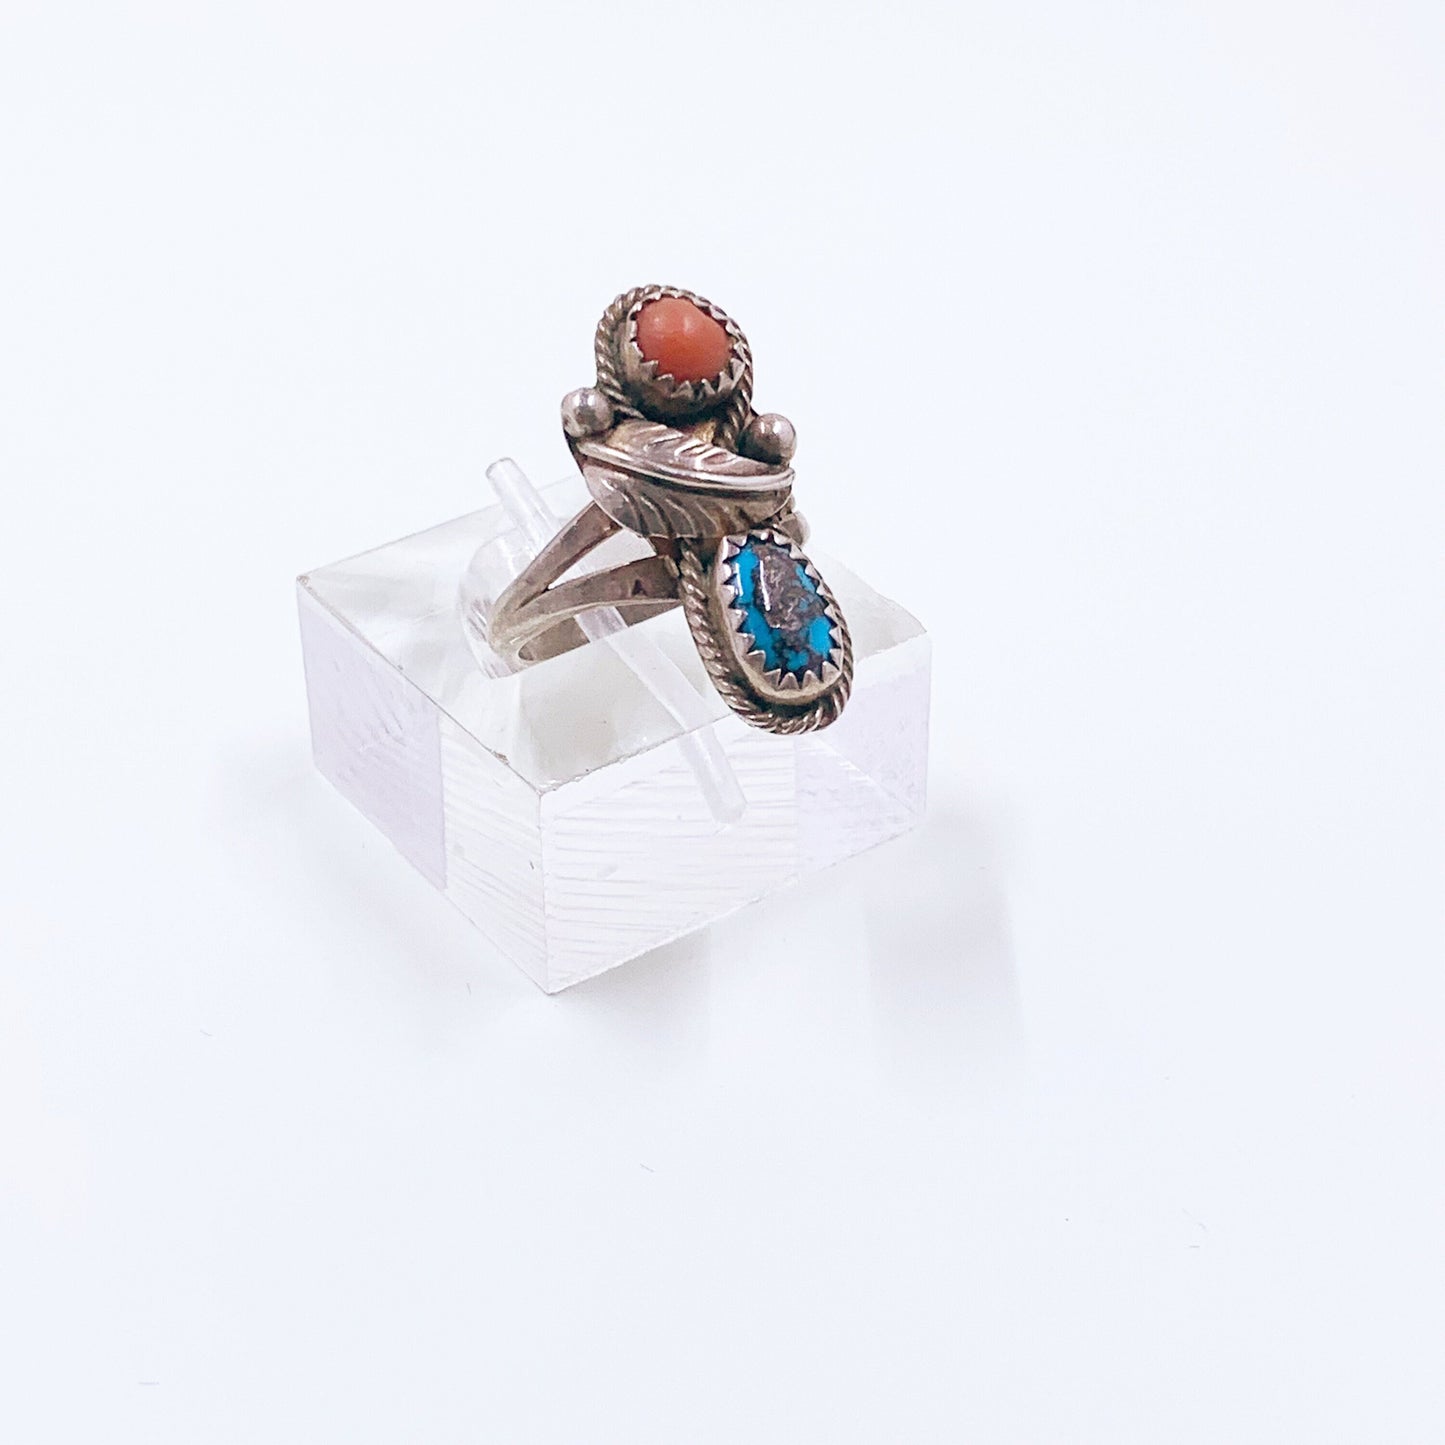 Vintage Silver Turquoise and Coral Ring | Southwest Jewelry | Silver Two Stone Ring | Size 5